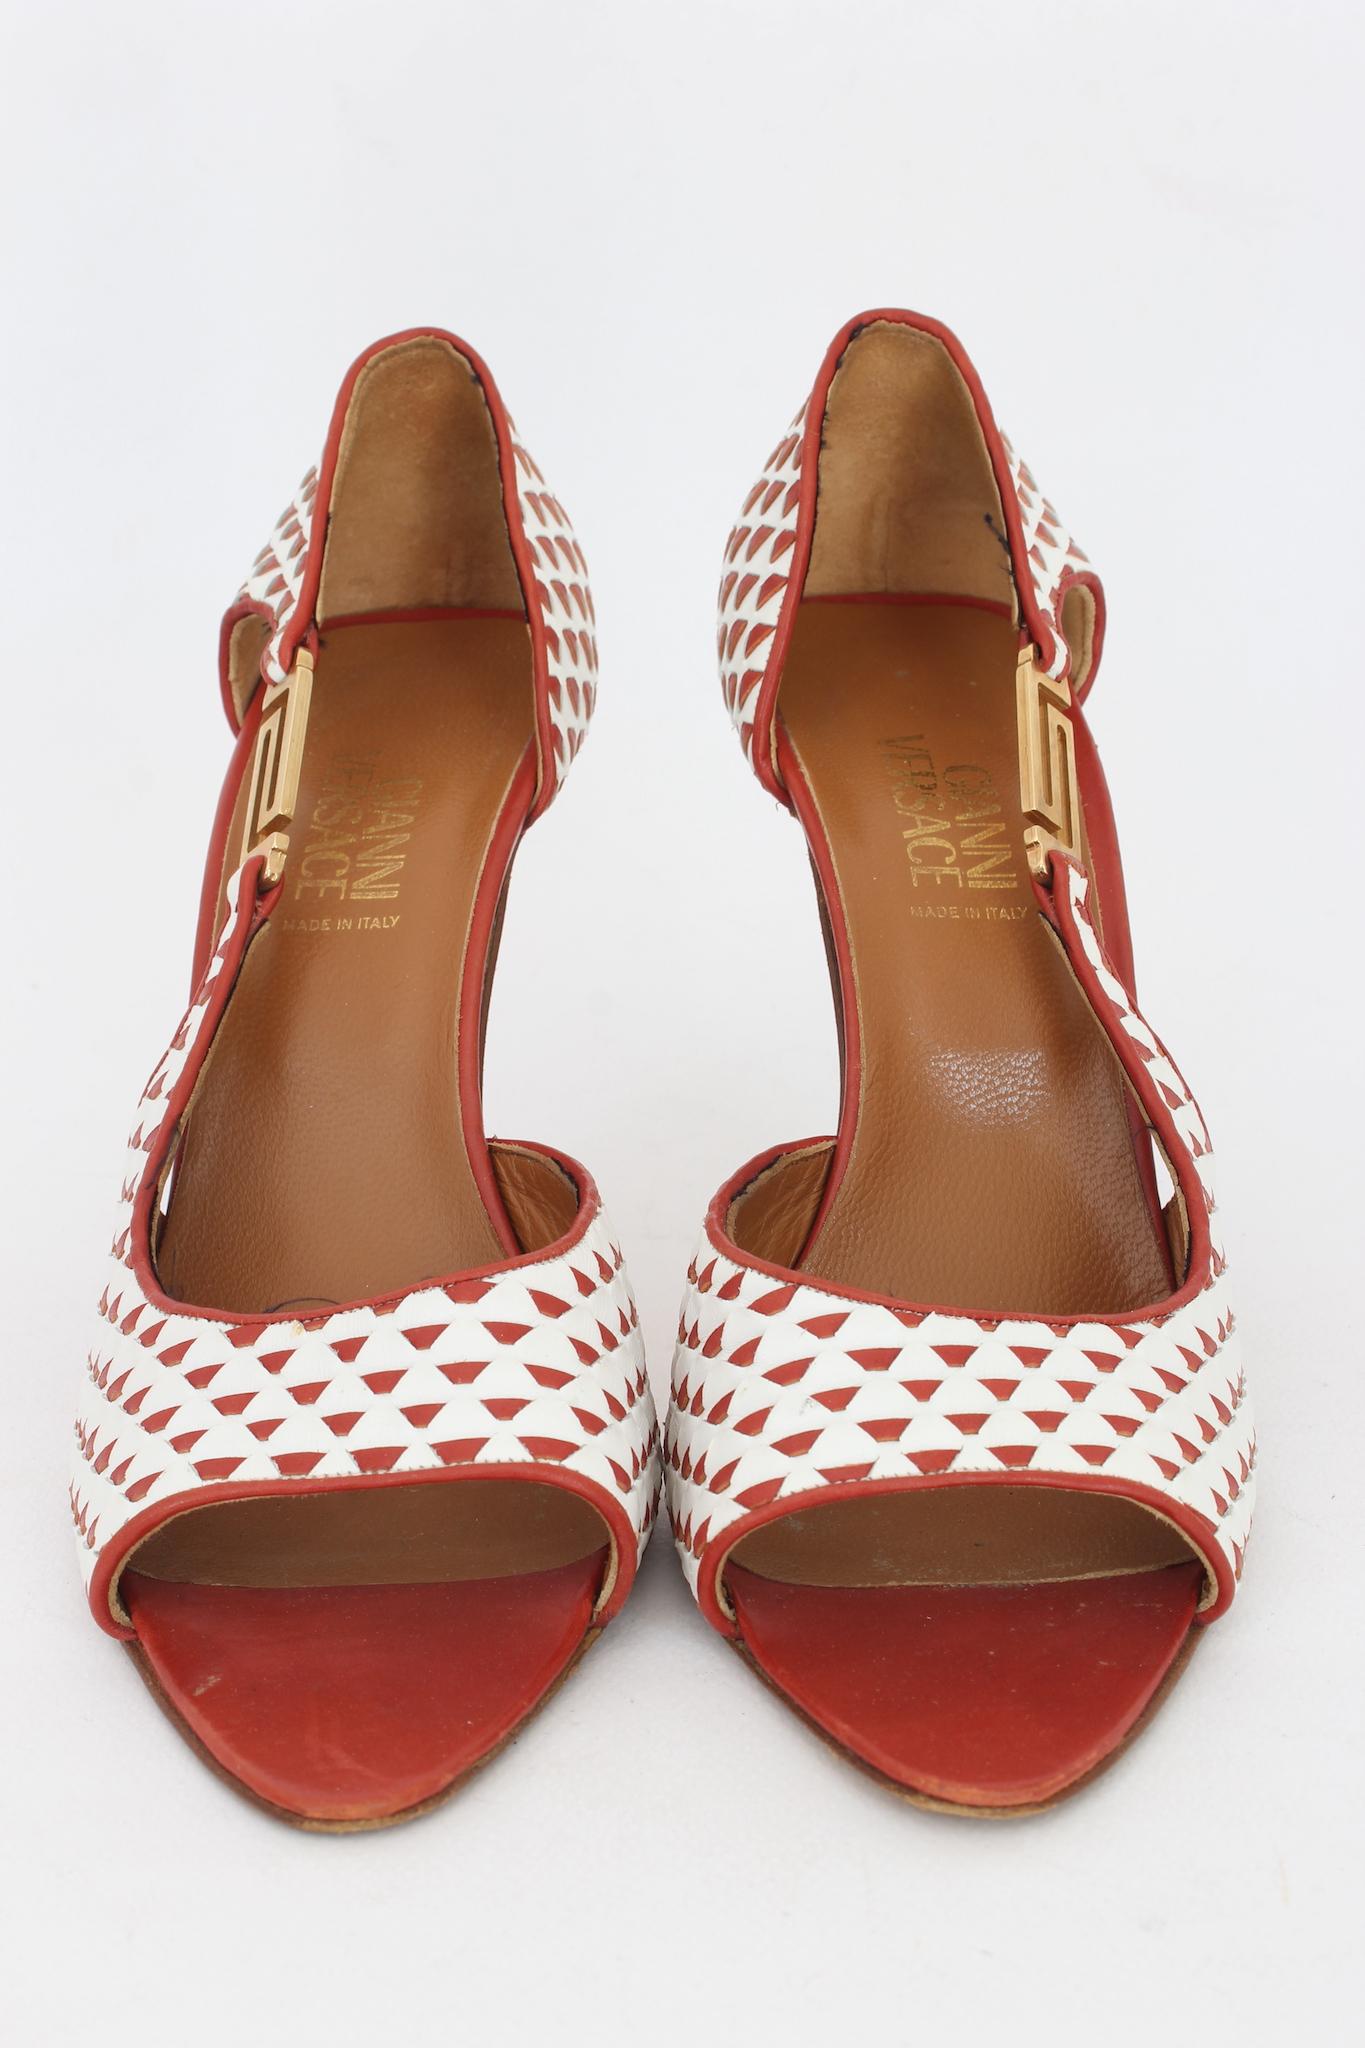 Versace Leather Red Check Vintage Heel Shoes 90s In Excellent Condition For Sale In Brindisi, Bt